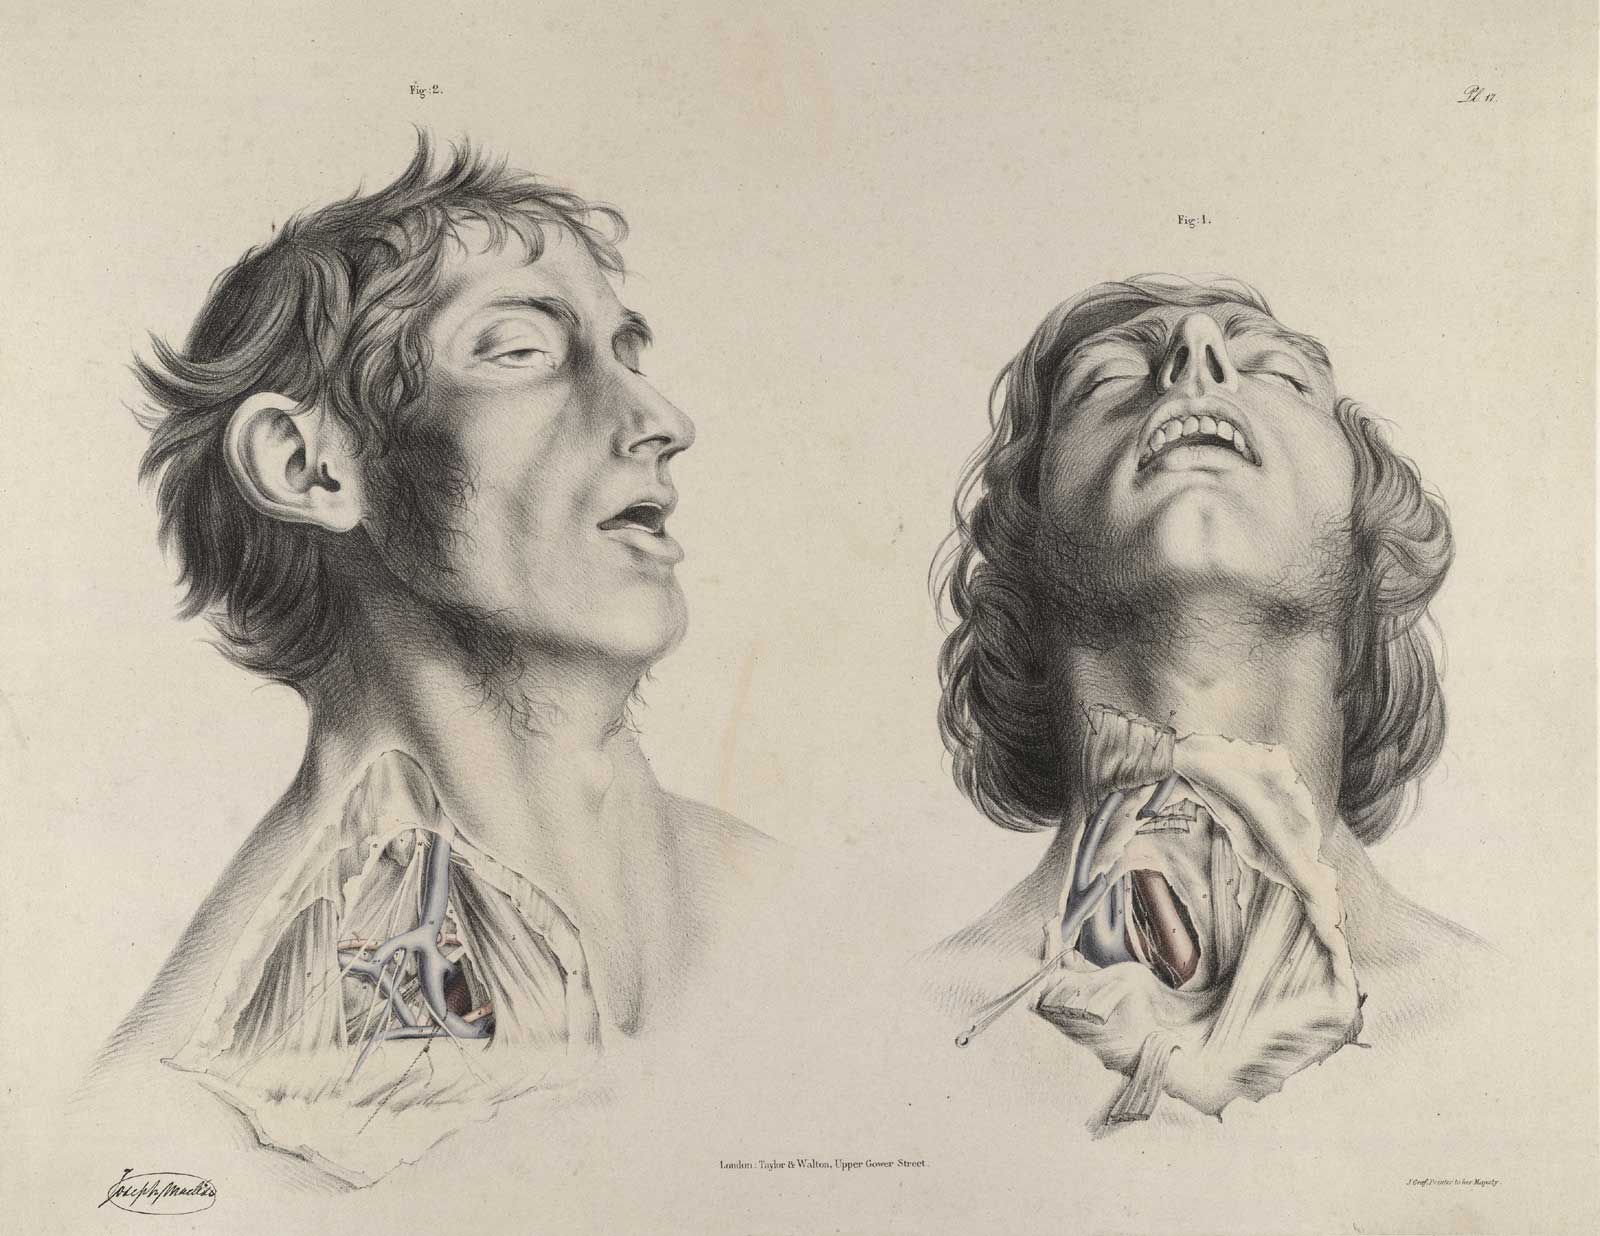 Plate 17 of Quain's The anatomy of the arteries of the human body, with its applications to pathology and operative surgery, featuring the two views of the right side of his neck arteries. The left image is from the right side and the right image is from a frontal view.